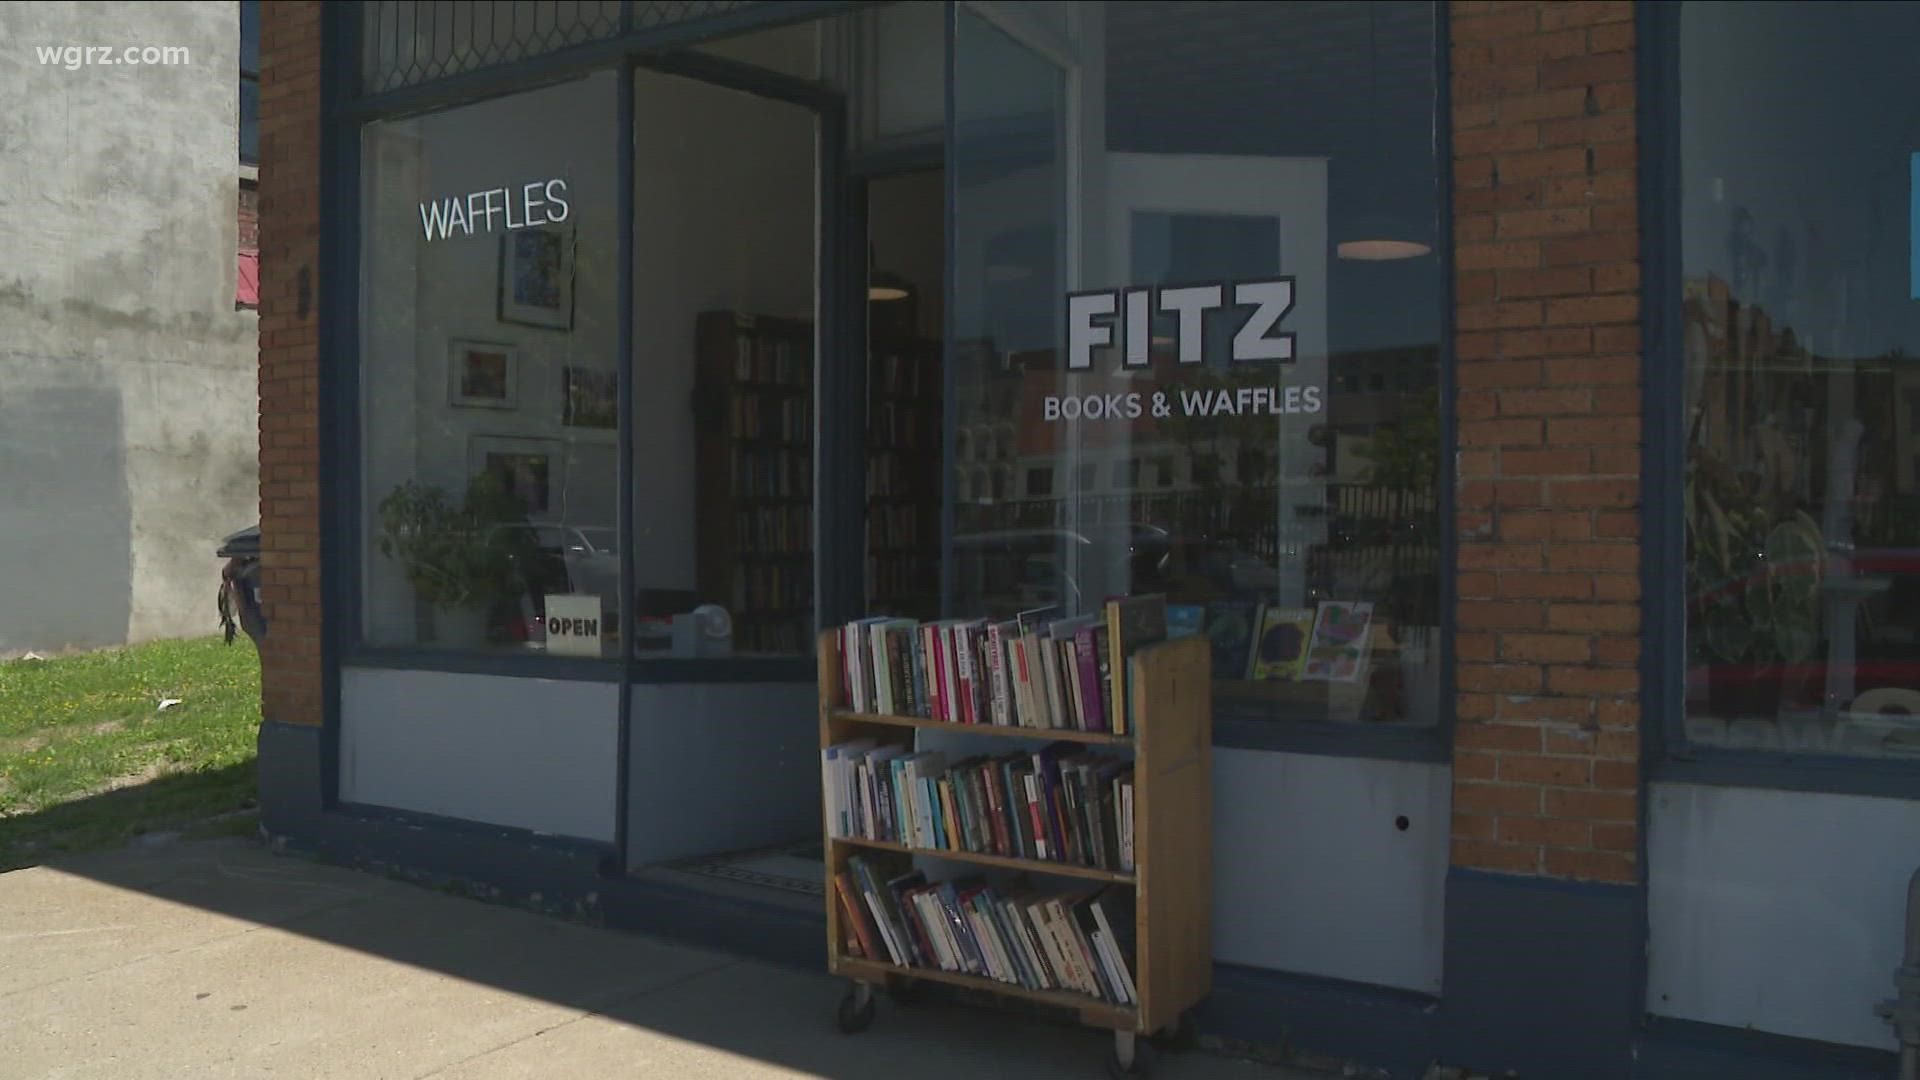 Stopping in to Fitz Books & Waffles on Ellicott street in downtown Buffalo